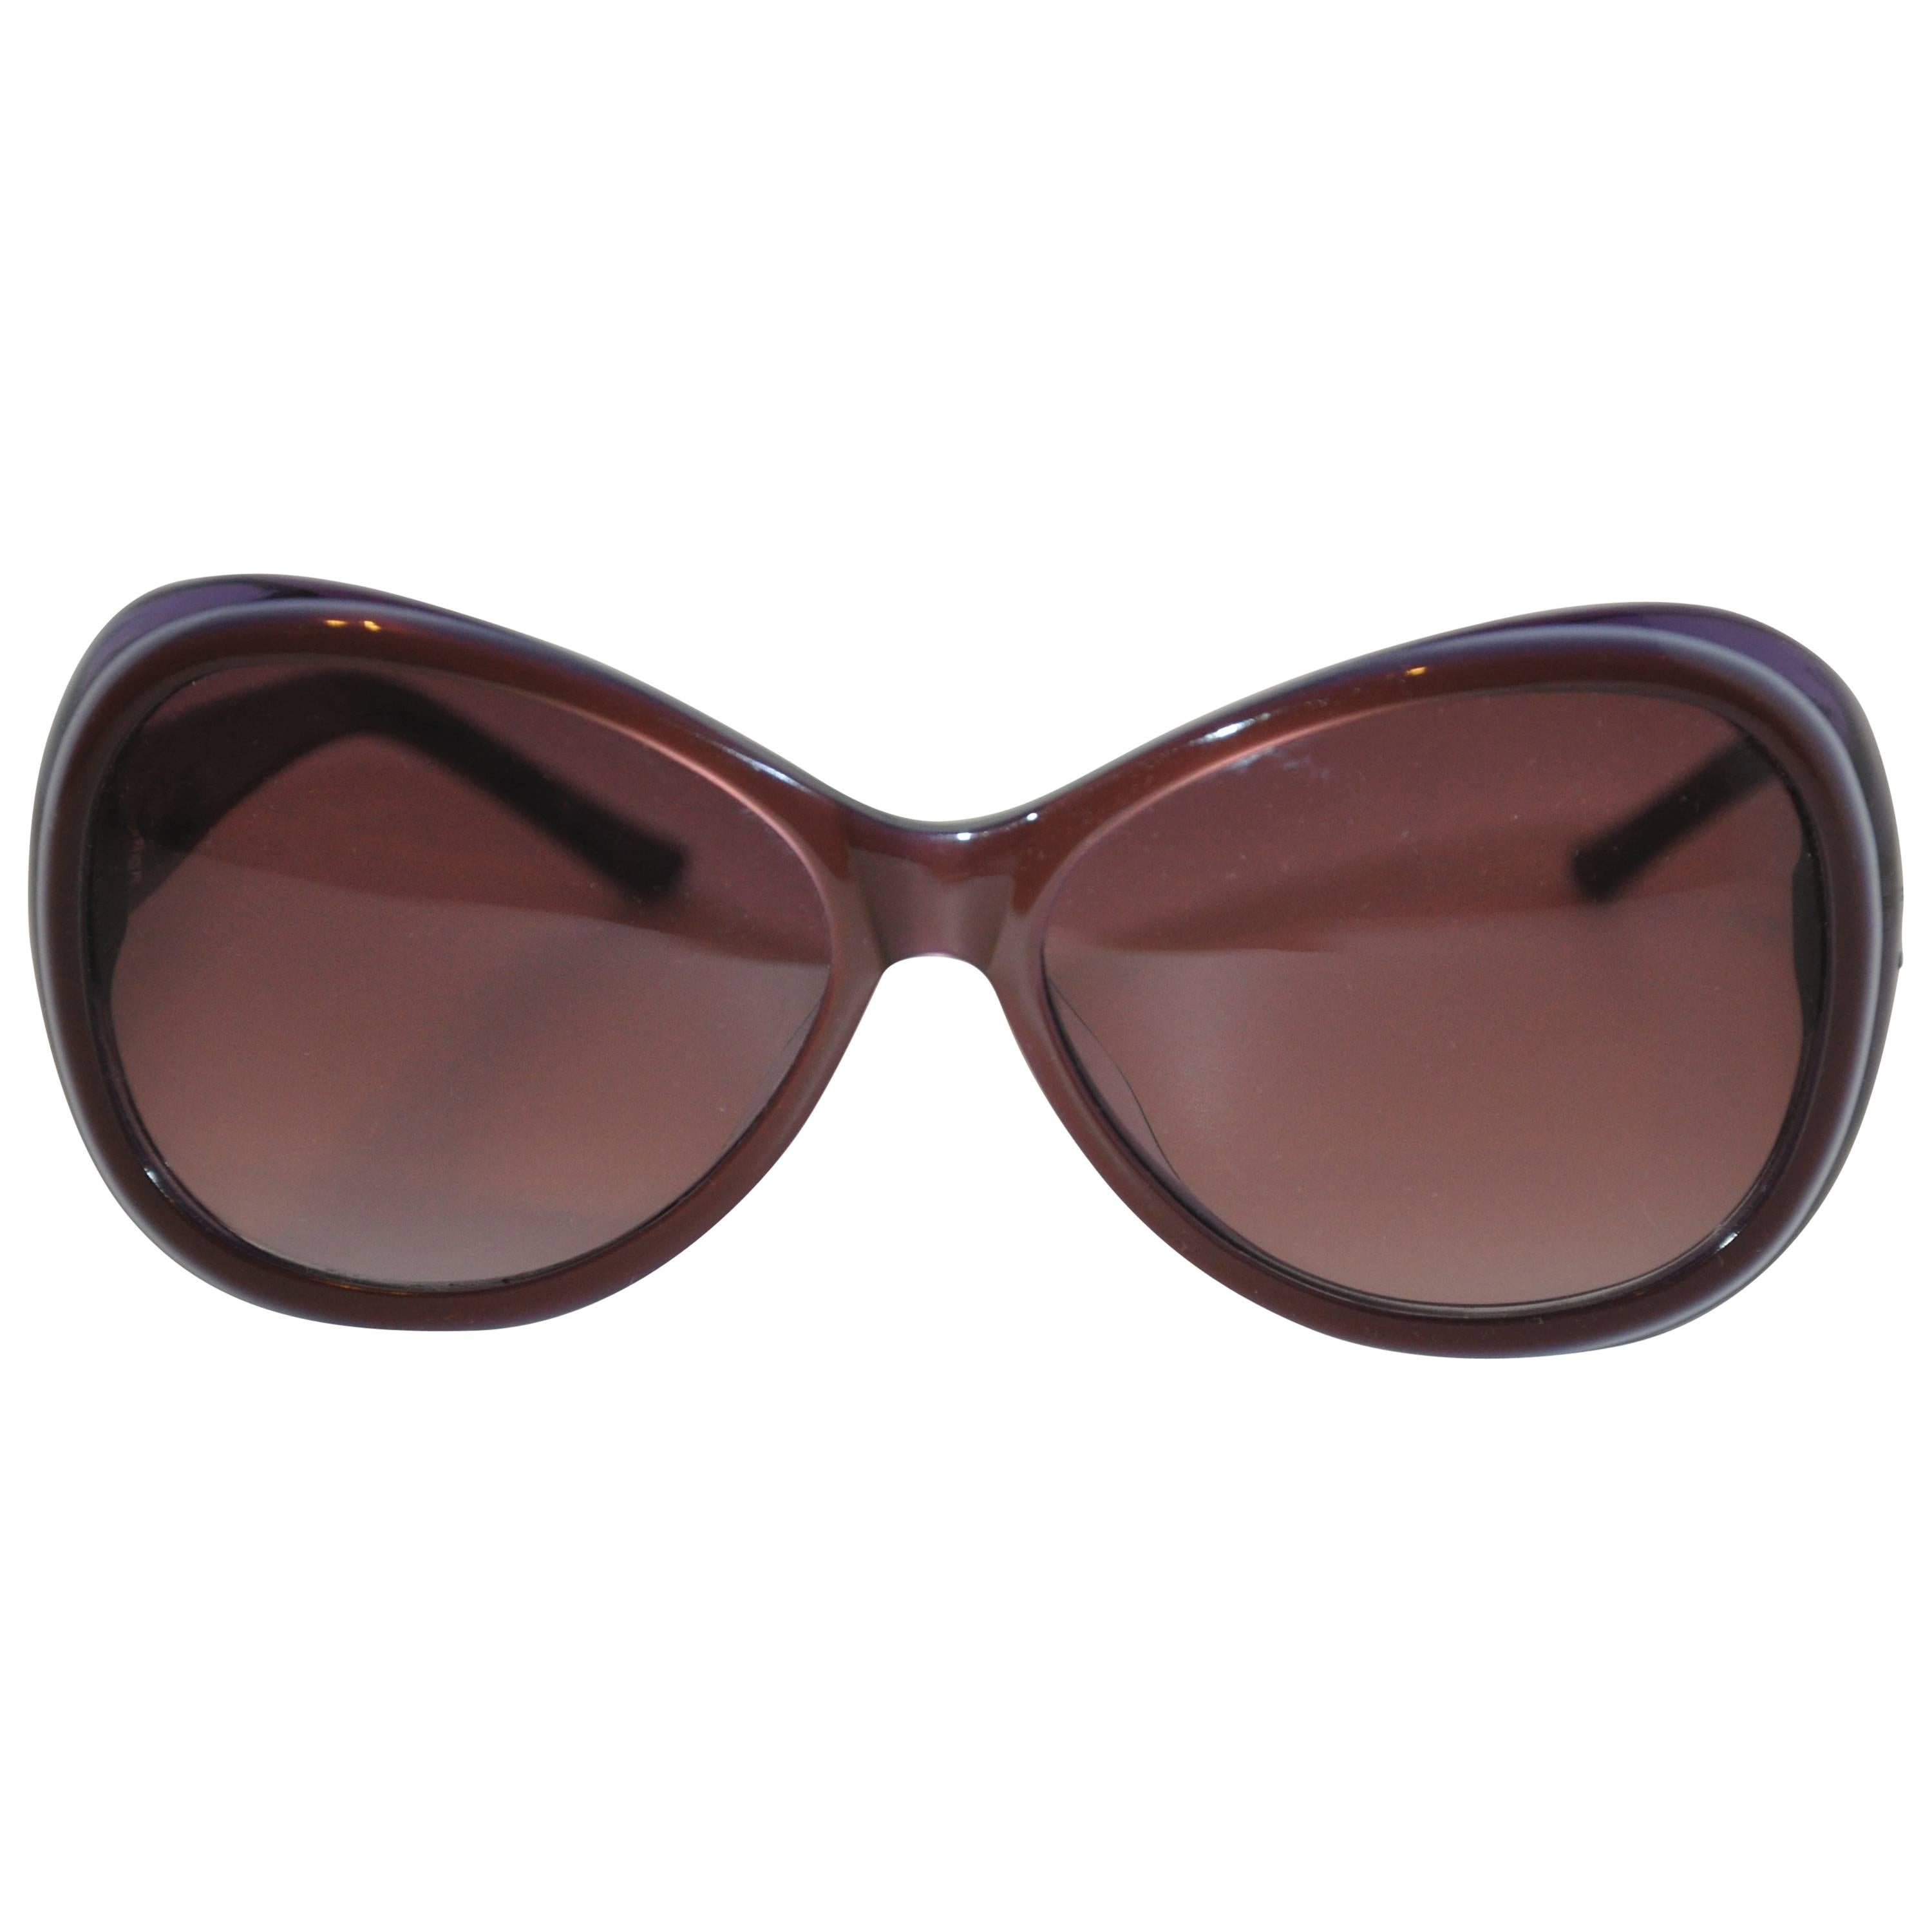 Judith Leiber "Shades of Violet" Lucid with Micro Rhinestone "Leafs Sunglasses For Sale